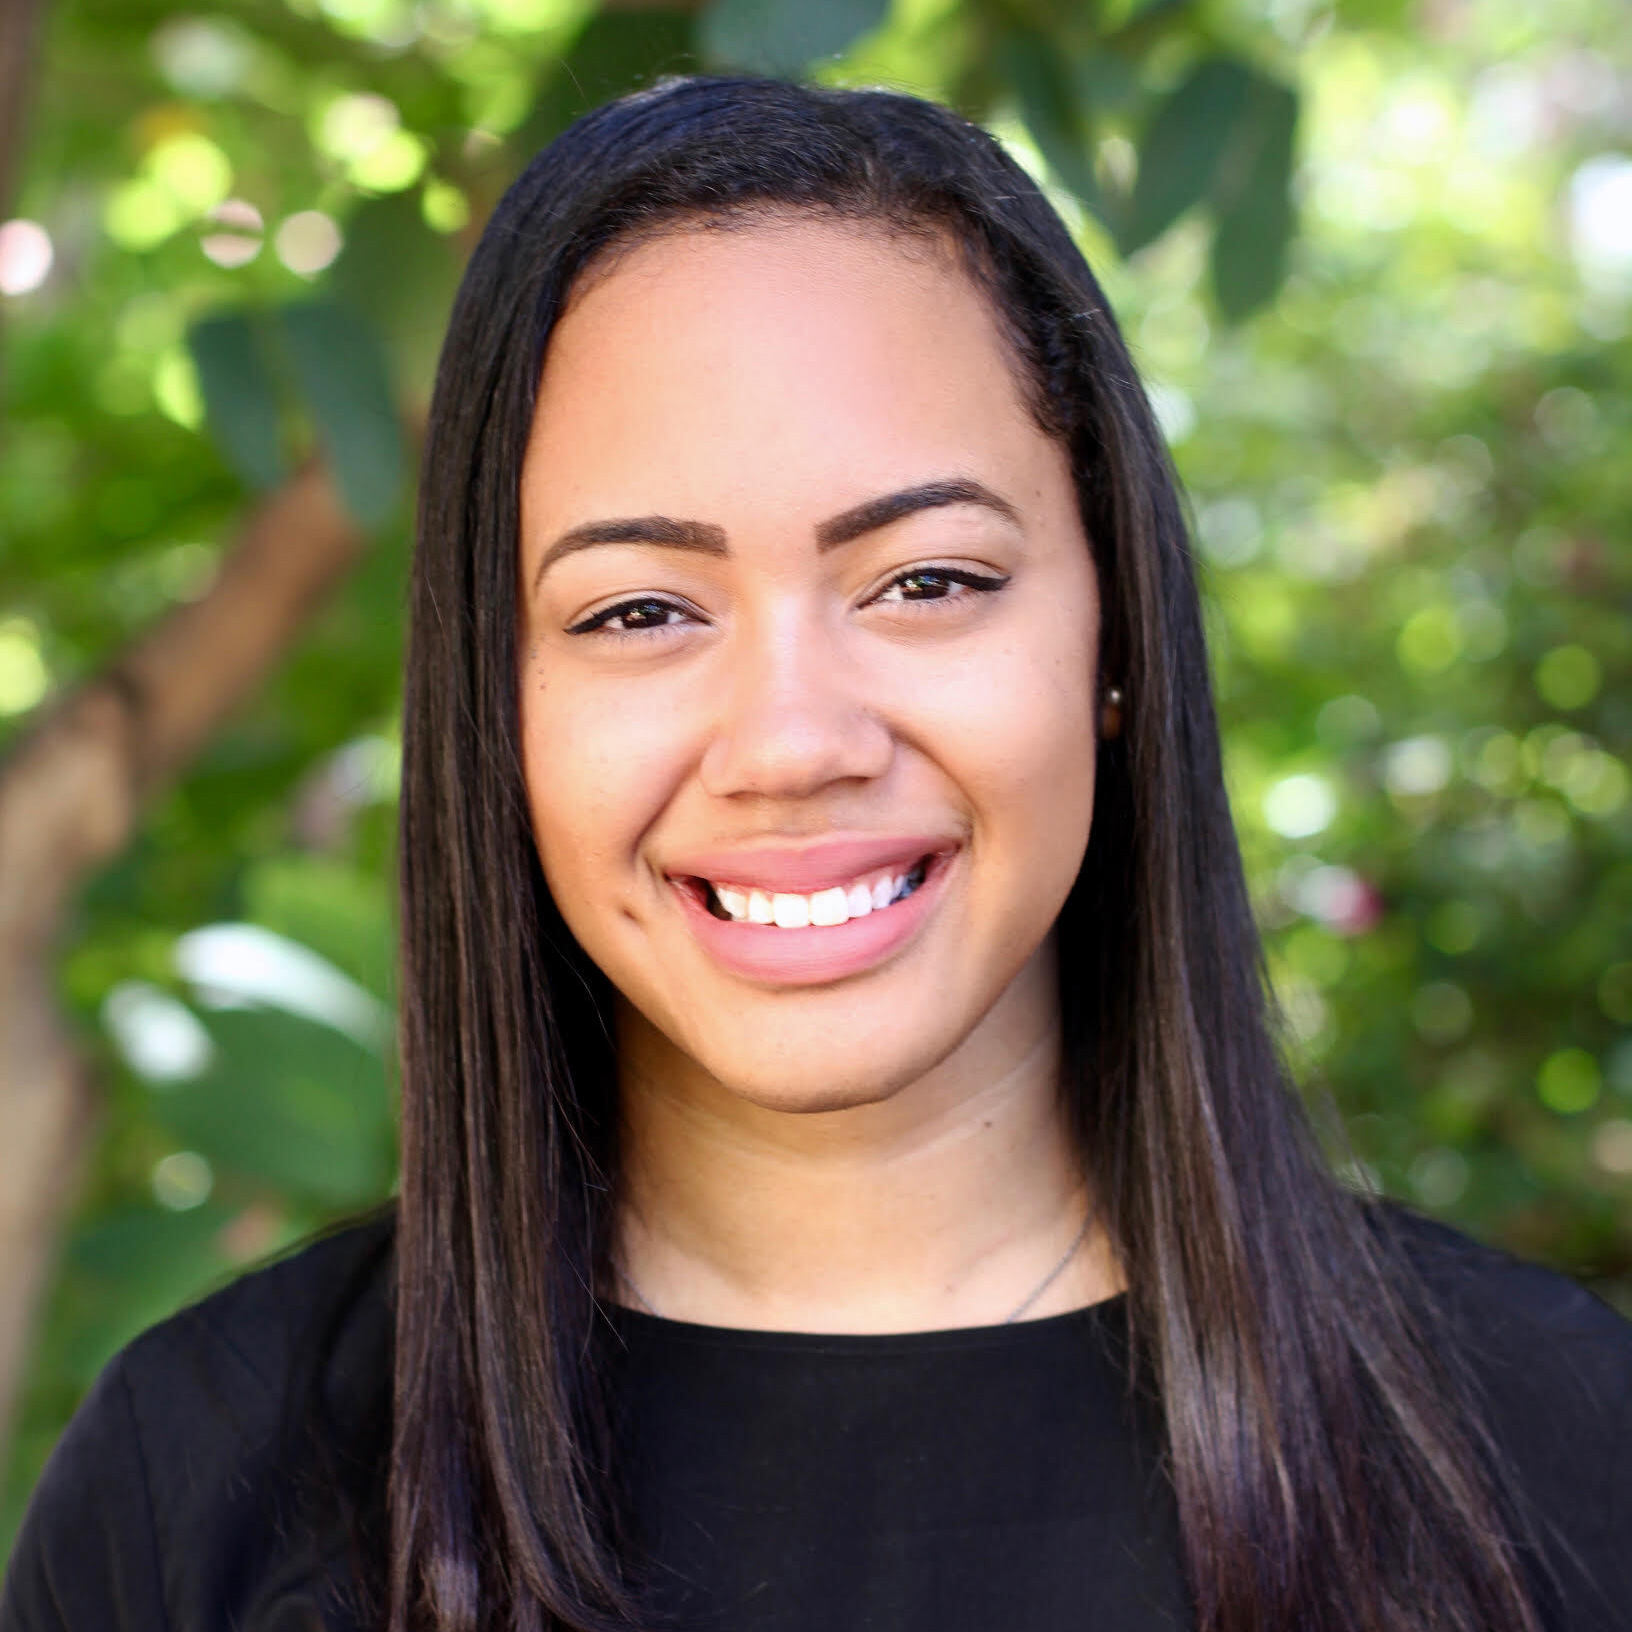 Tiana Lyew2020 AlumnaCurrent role: Coordinator, Global Public Relations at Bain & Company